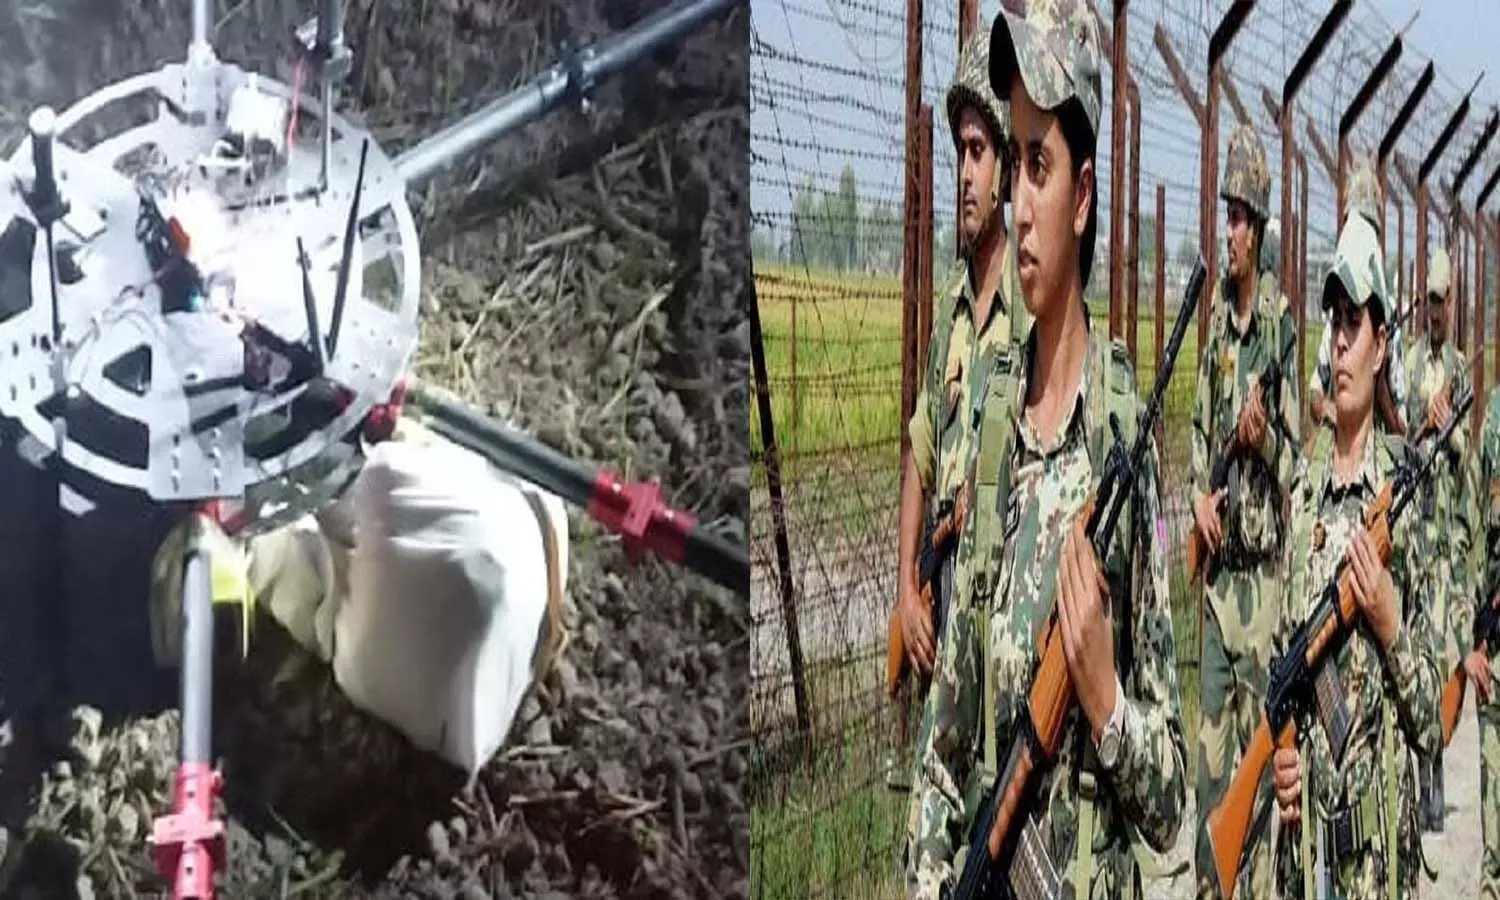 Women soldiers of BSF shot down two Pakistani drones at Amritsar border, both soldiers will be honored